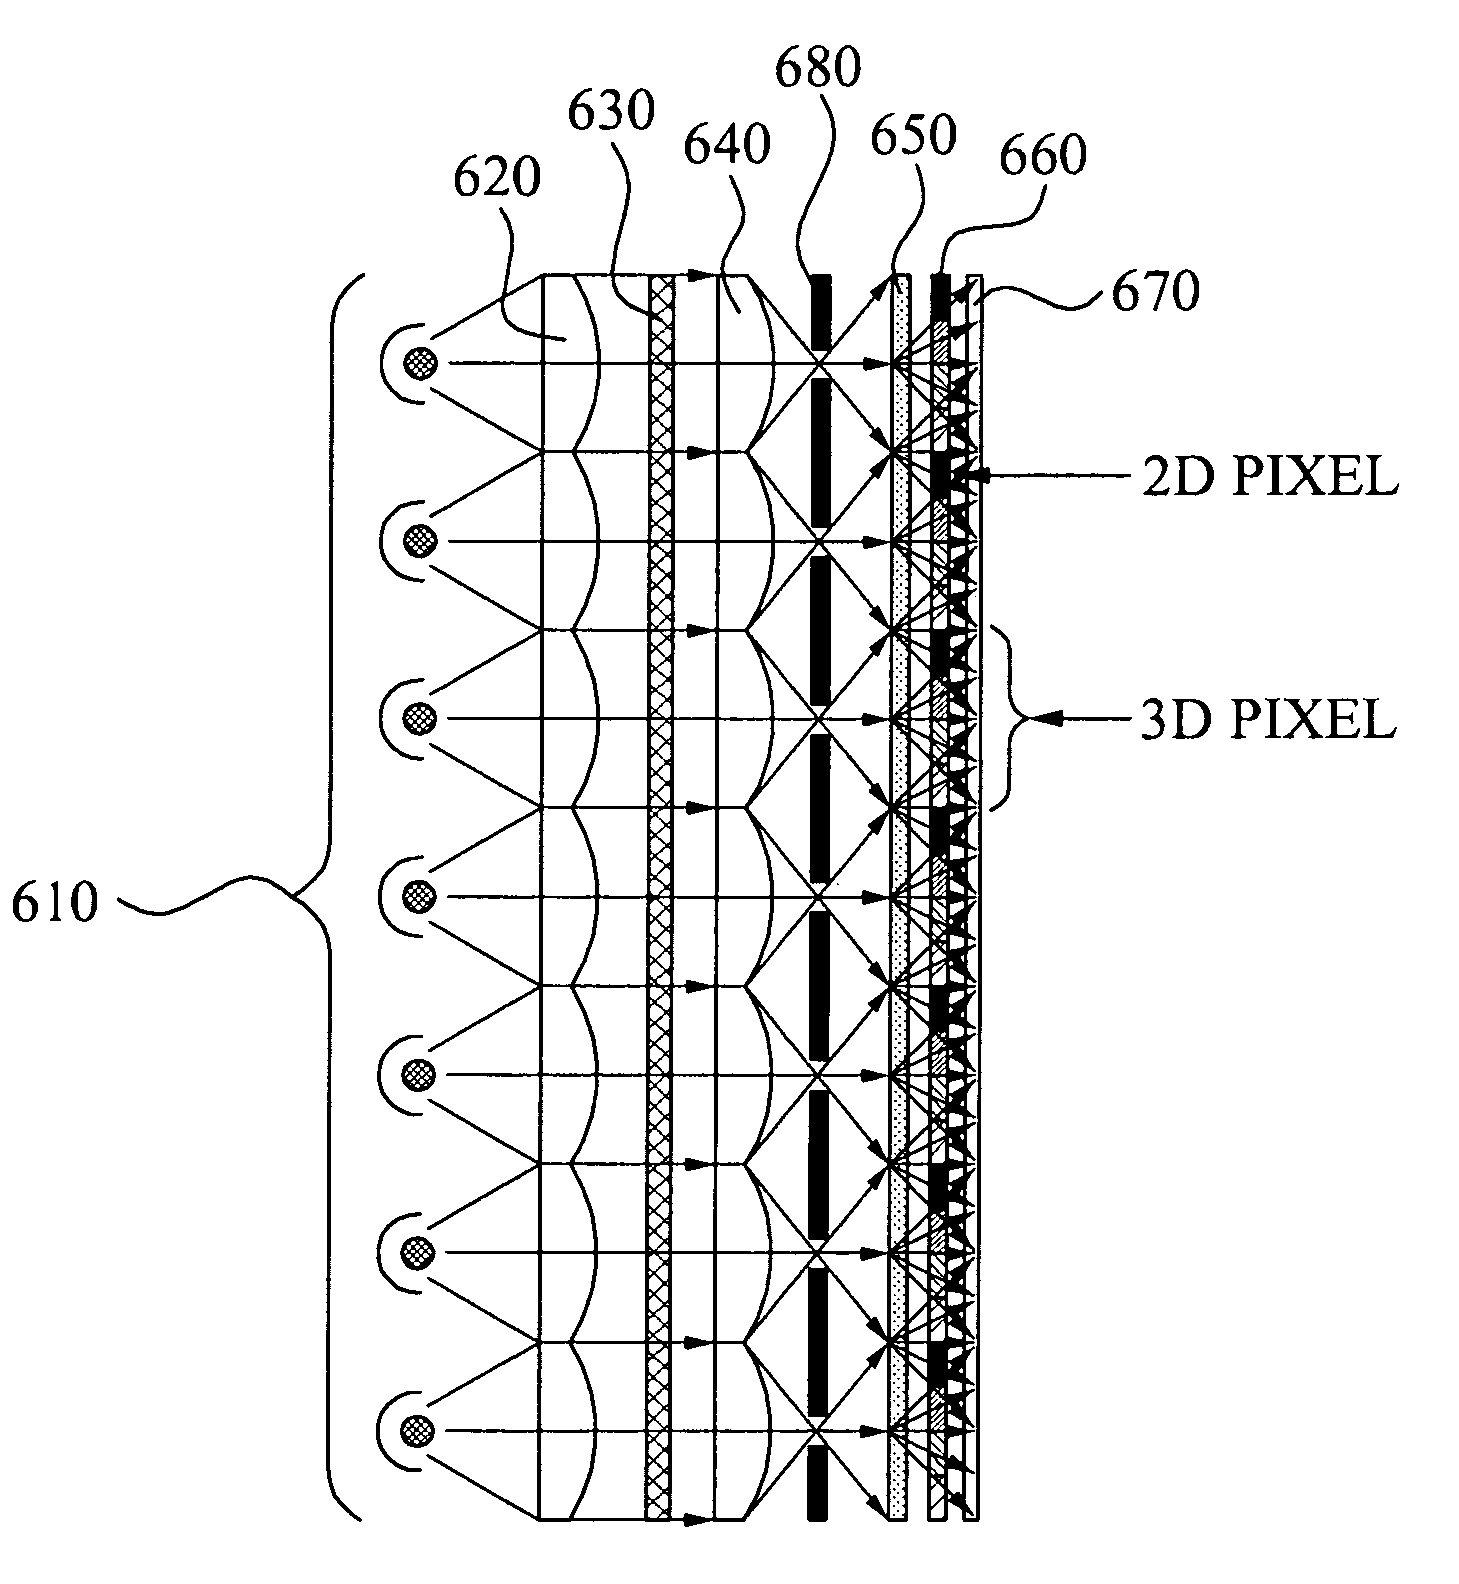 Apparatus and method for 2D and 3D image switchable display